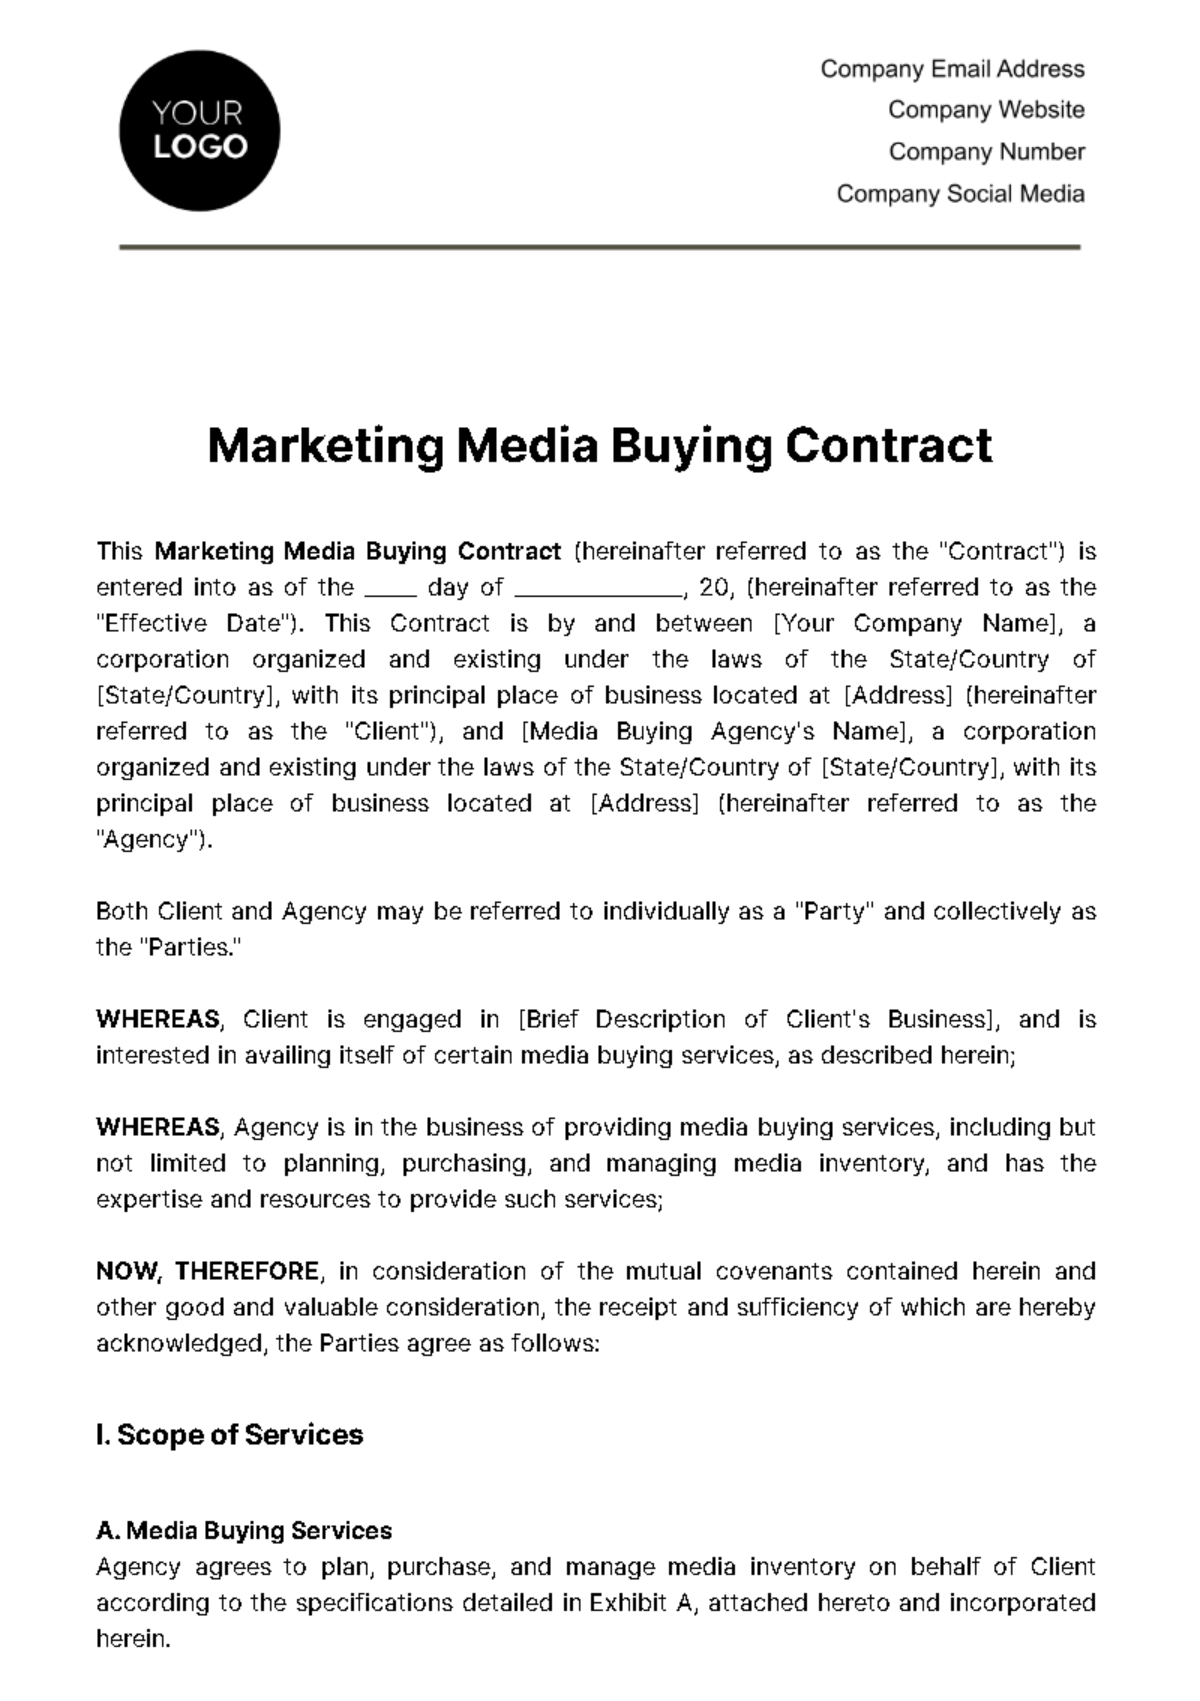 Marketing Media Buying Contract Template